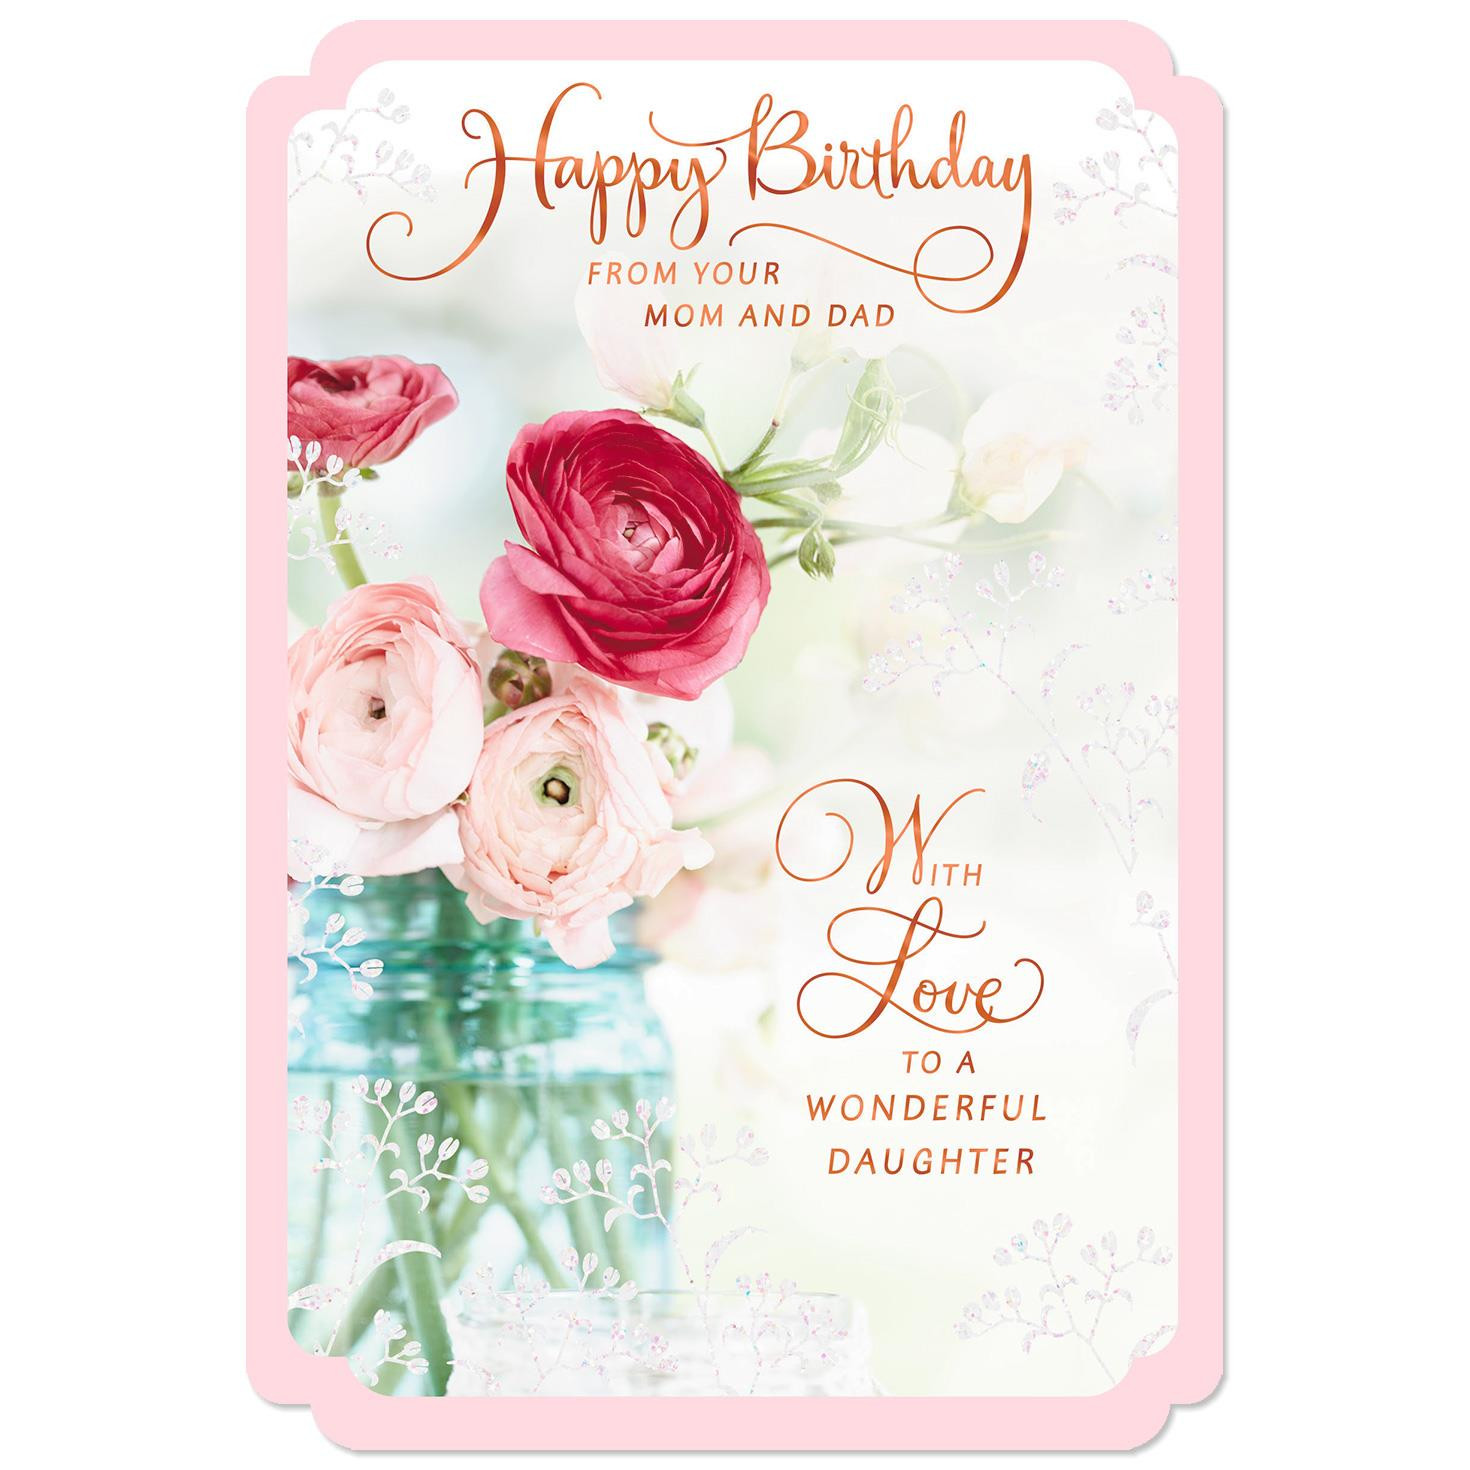 Hallmark Birthday Cards
 Wishes for a Wonderful Daughter Birthday Card from Mom and